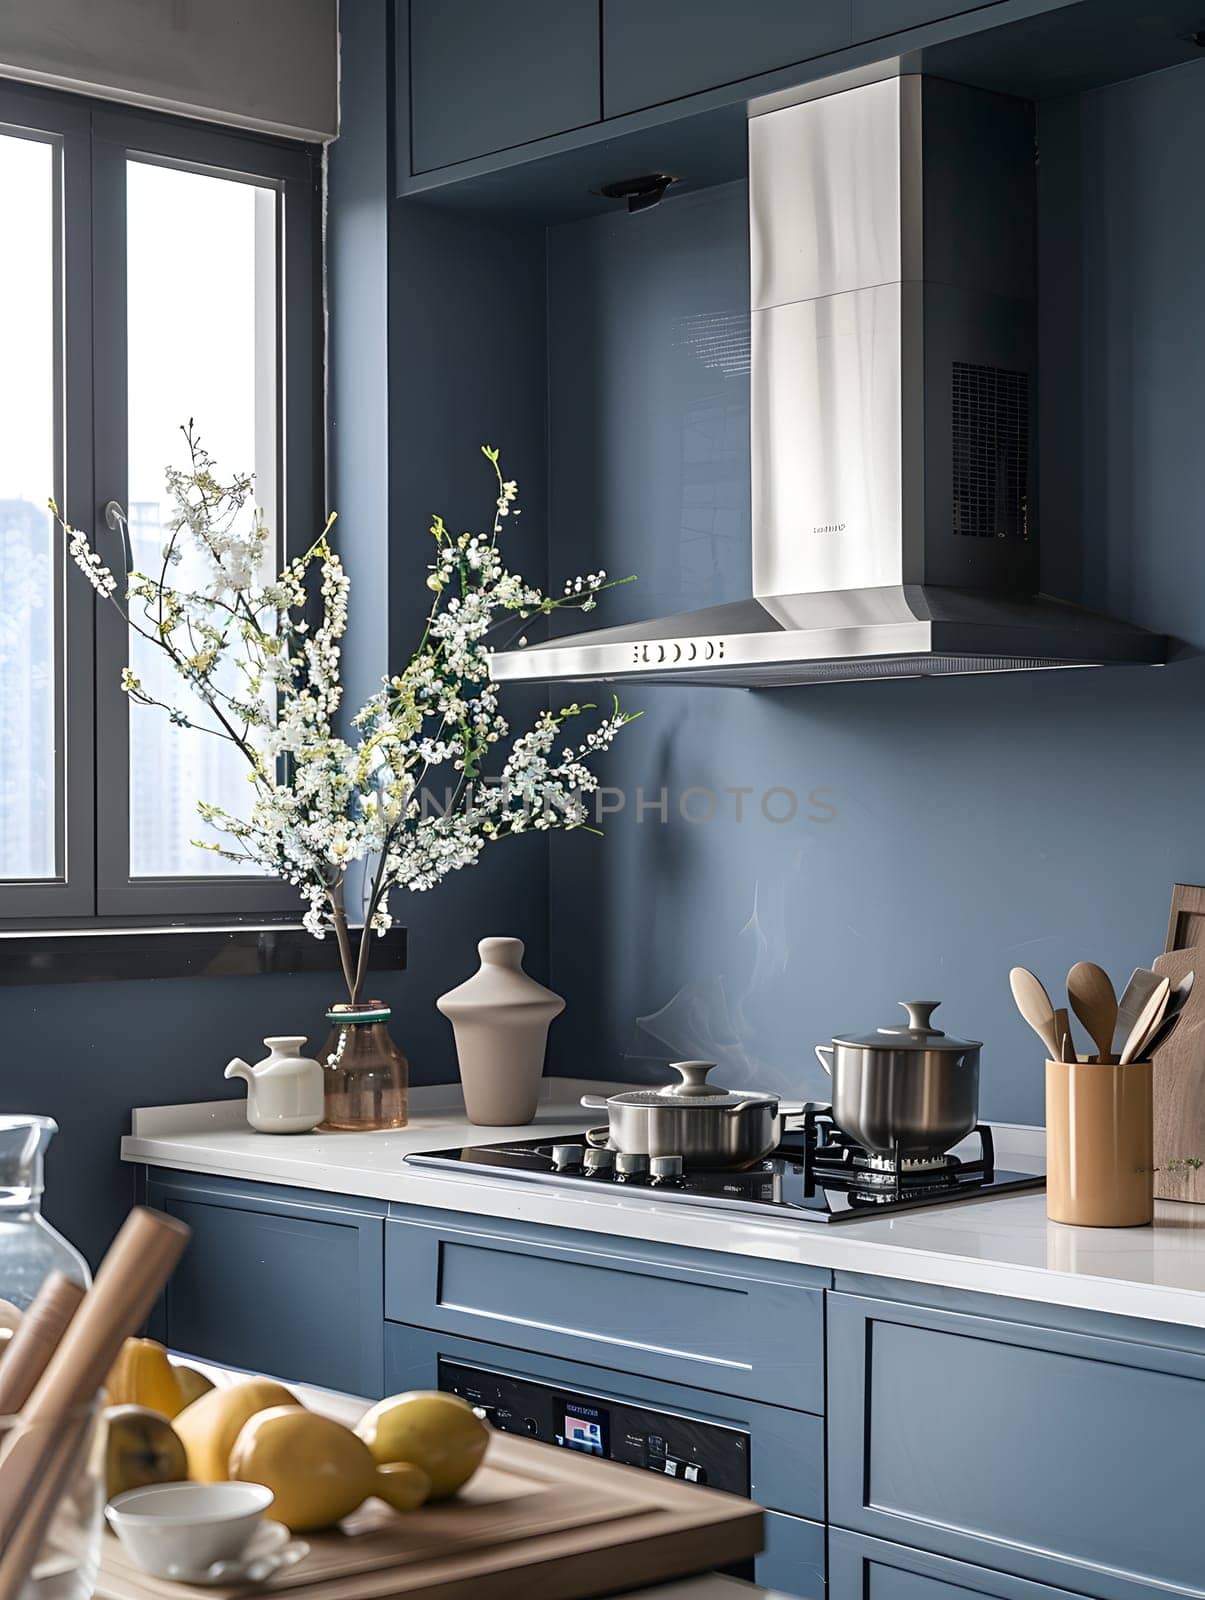 A kitchen with blue cabinetry, a stove top oven, and a countertop, complemented by a window, flowerpot, and tableware, creating a welcoming interior design